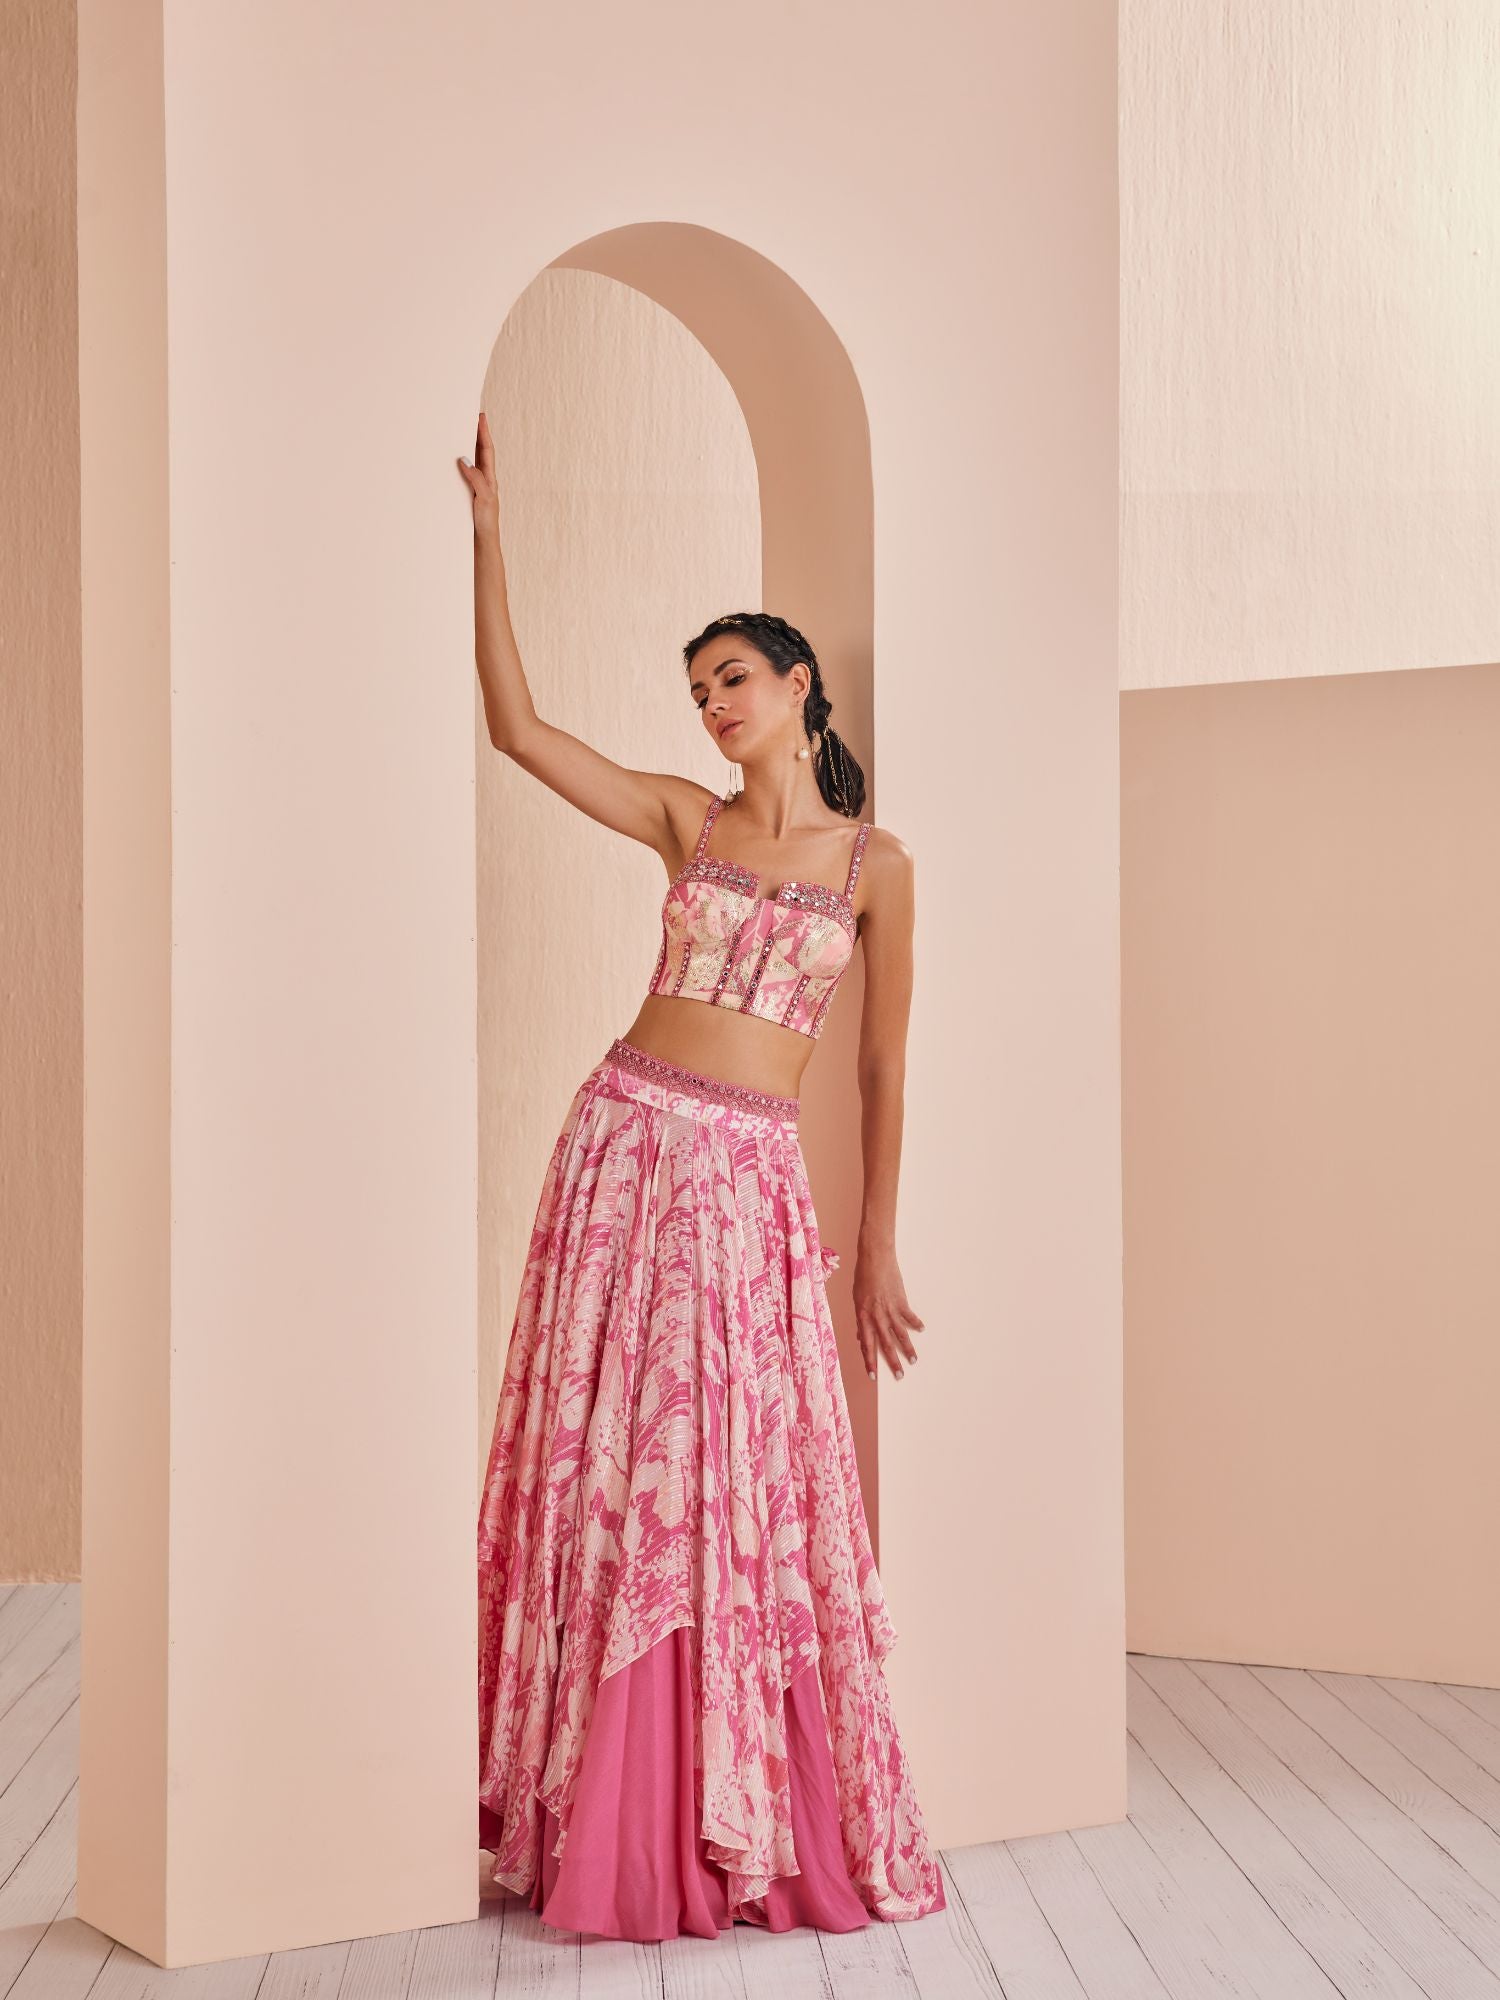 Printed chiffon lehenga paired up with blouse and cape